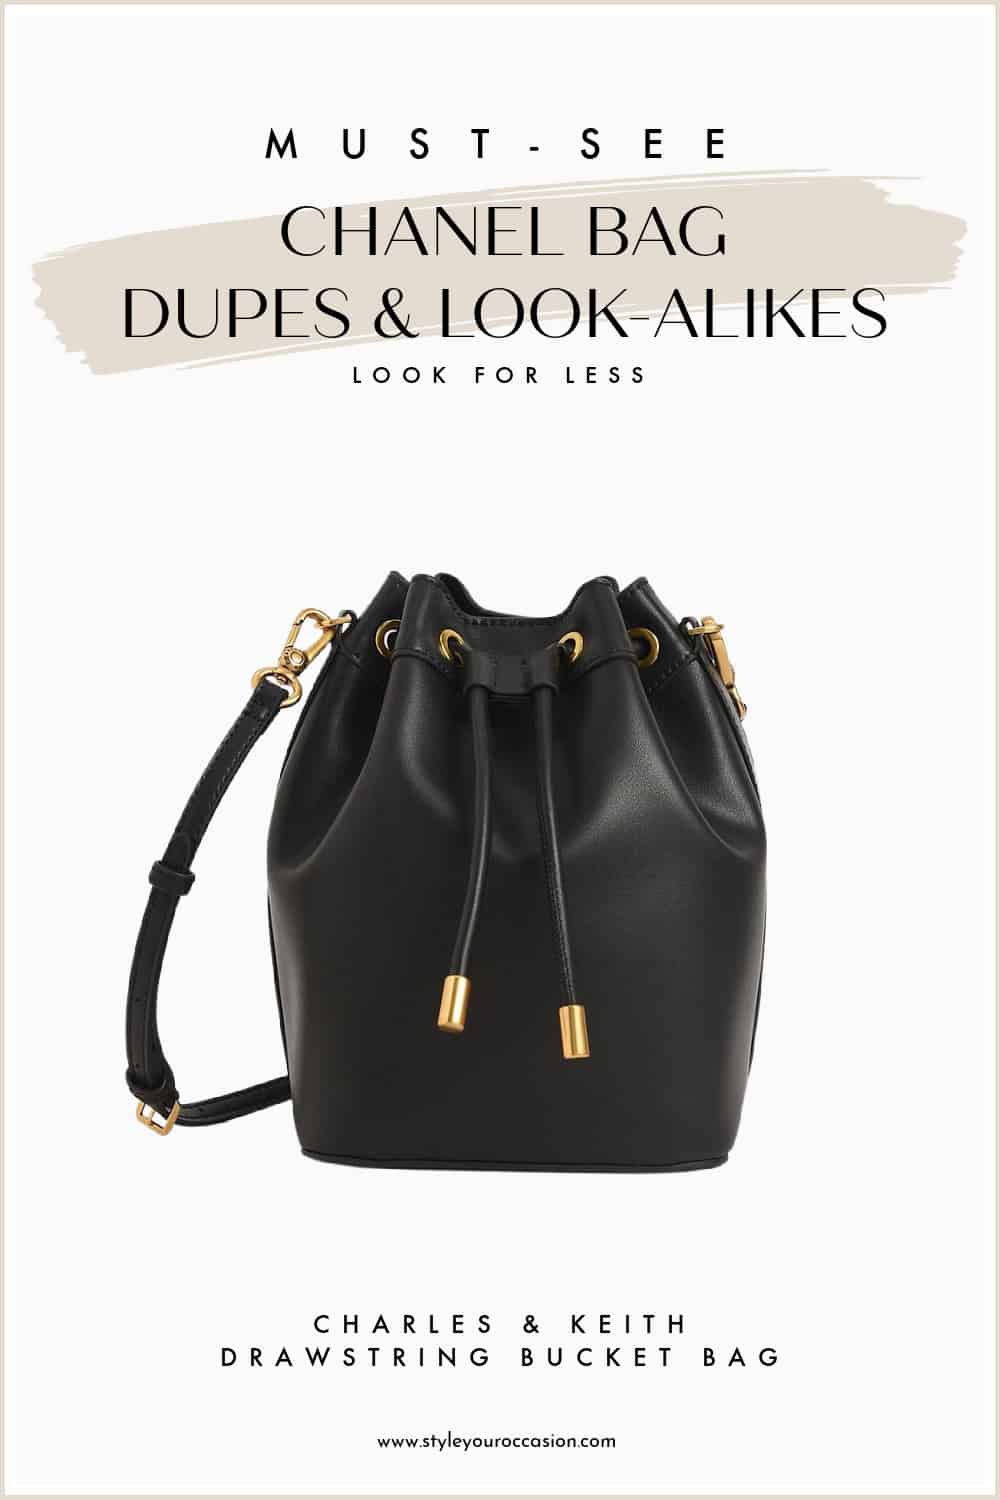 An image of a Chanel bucket bag dupe from Charles & Keith